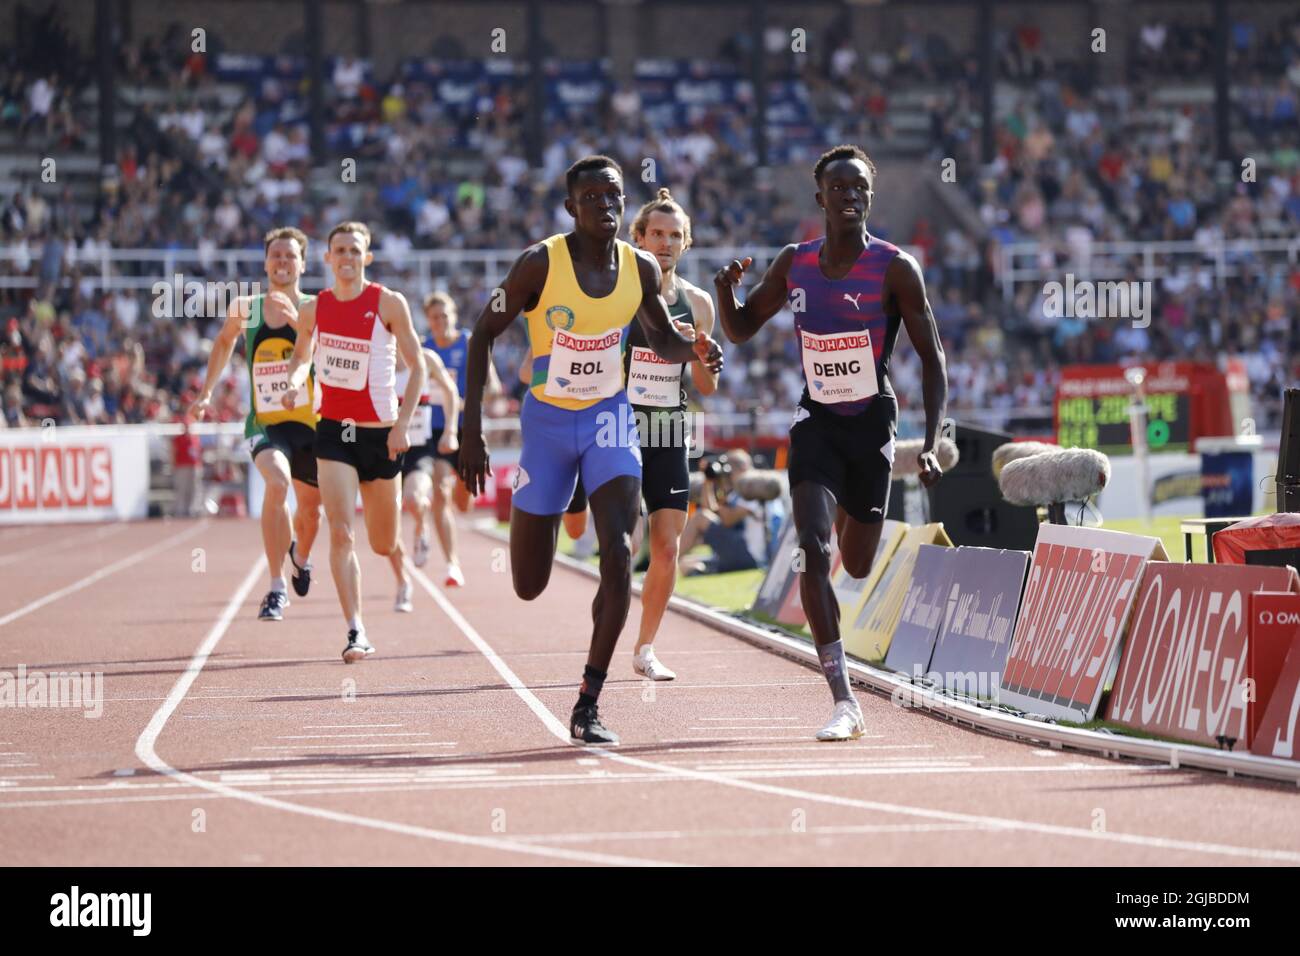 Peter Bol of Australia (L) comptes to win before compatriot Joseph Deng (R) and third placed van Rensburg of South Africa in the men's event at IAAF Diamond League